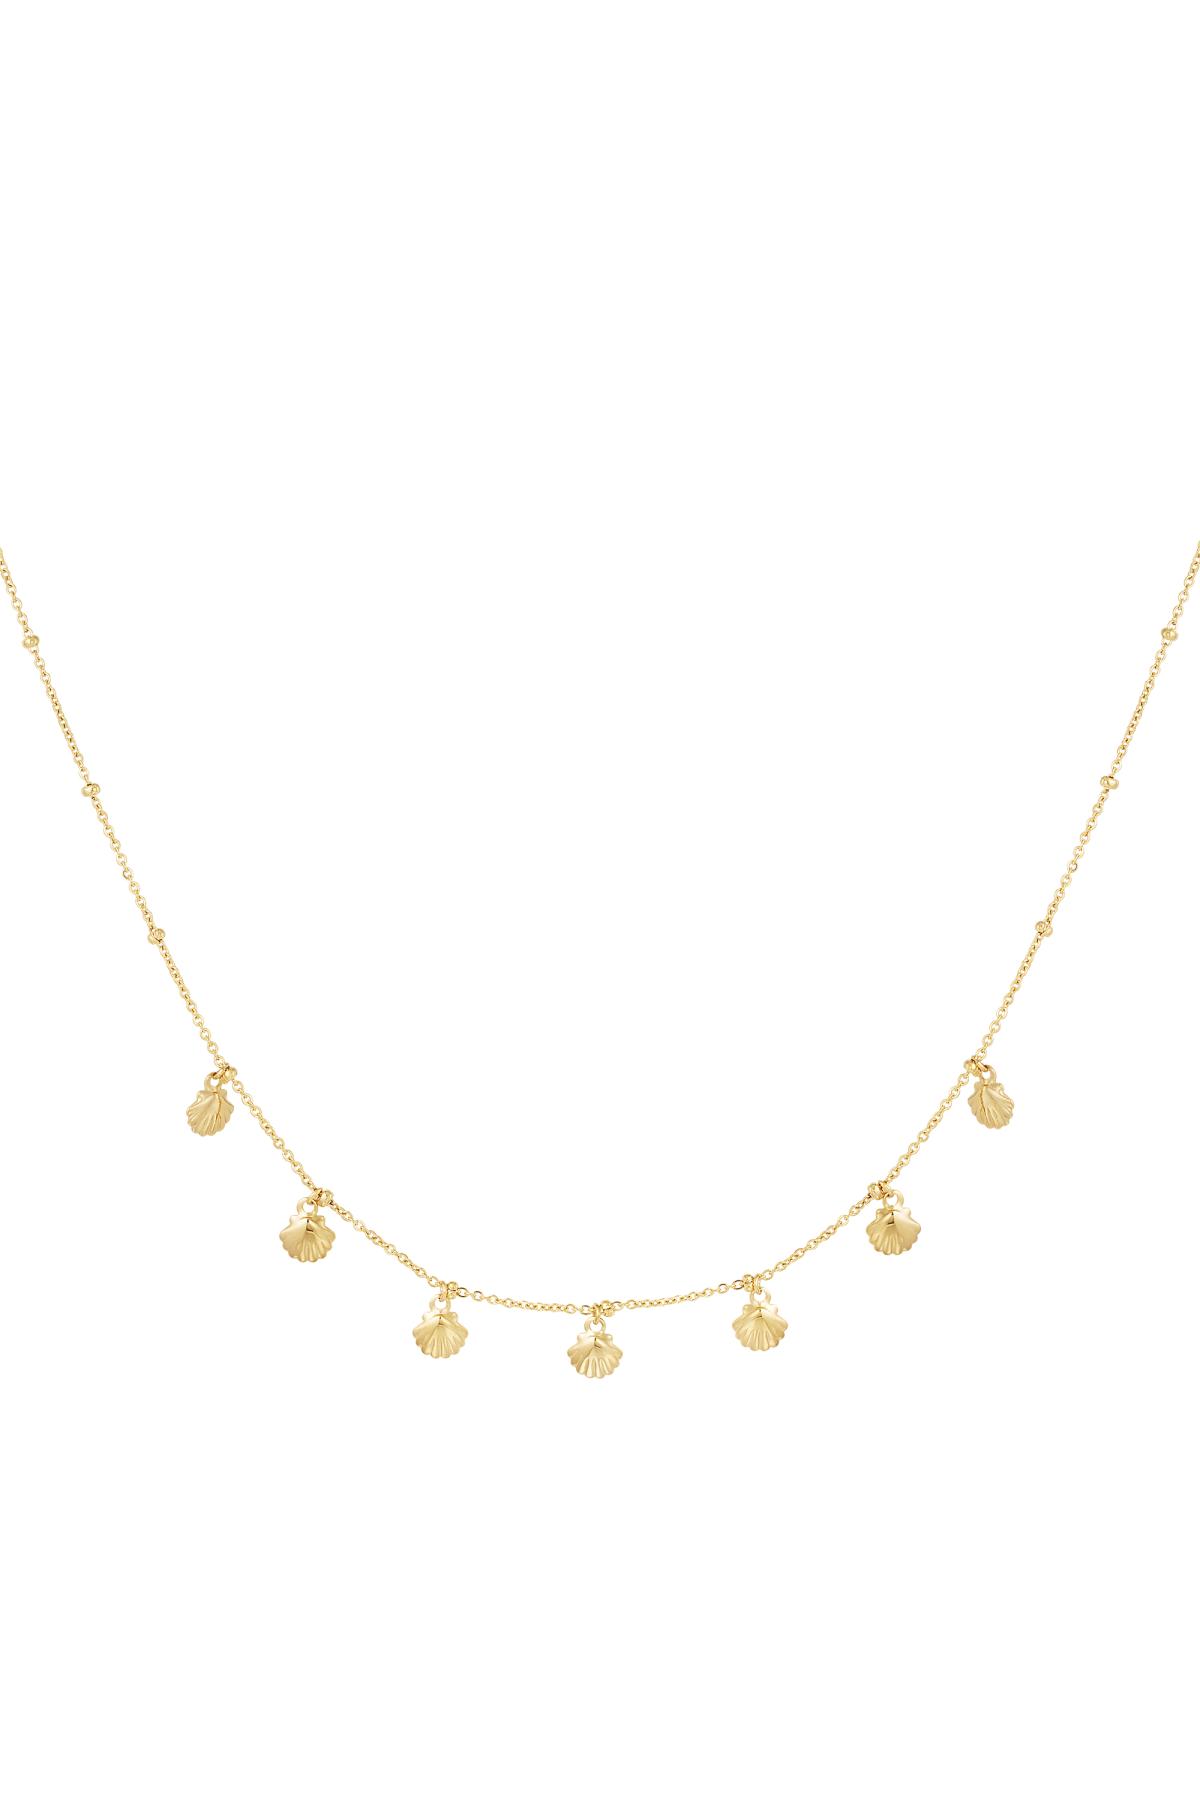 Dangling shells necklace - Beach collection Gold Stainless Steel h5 